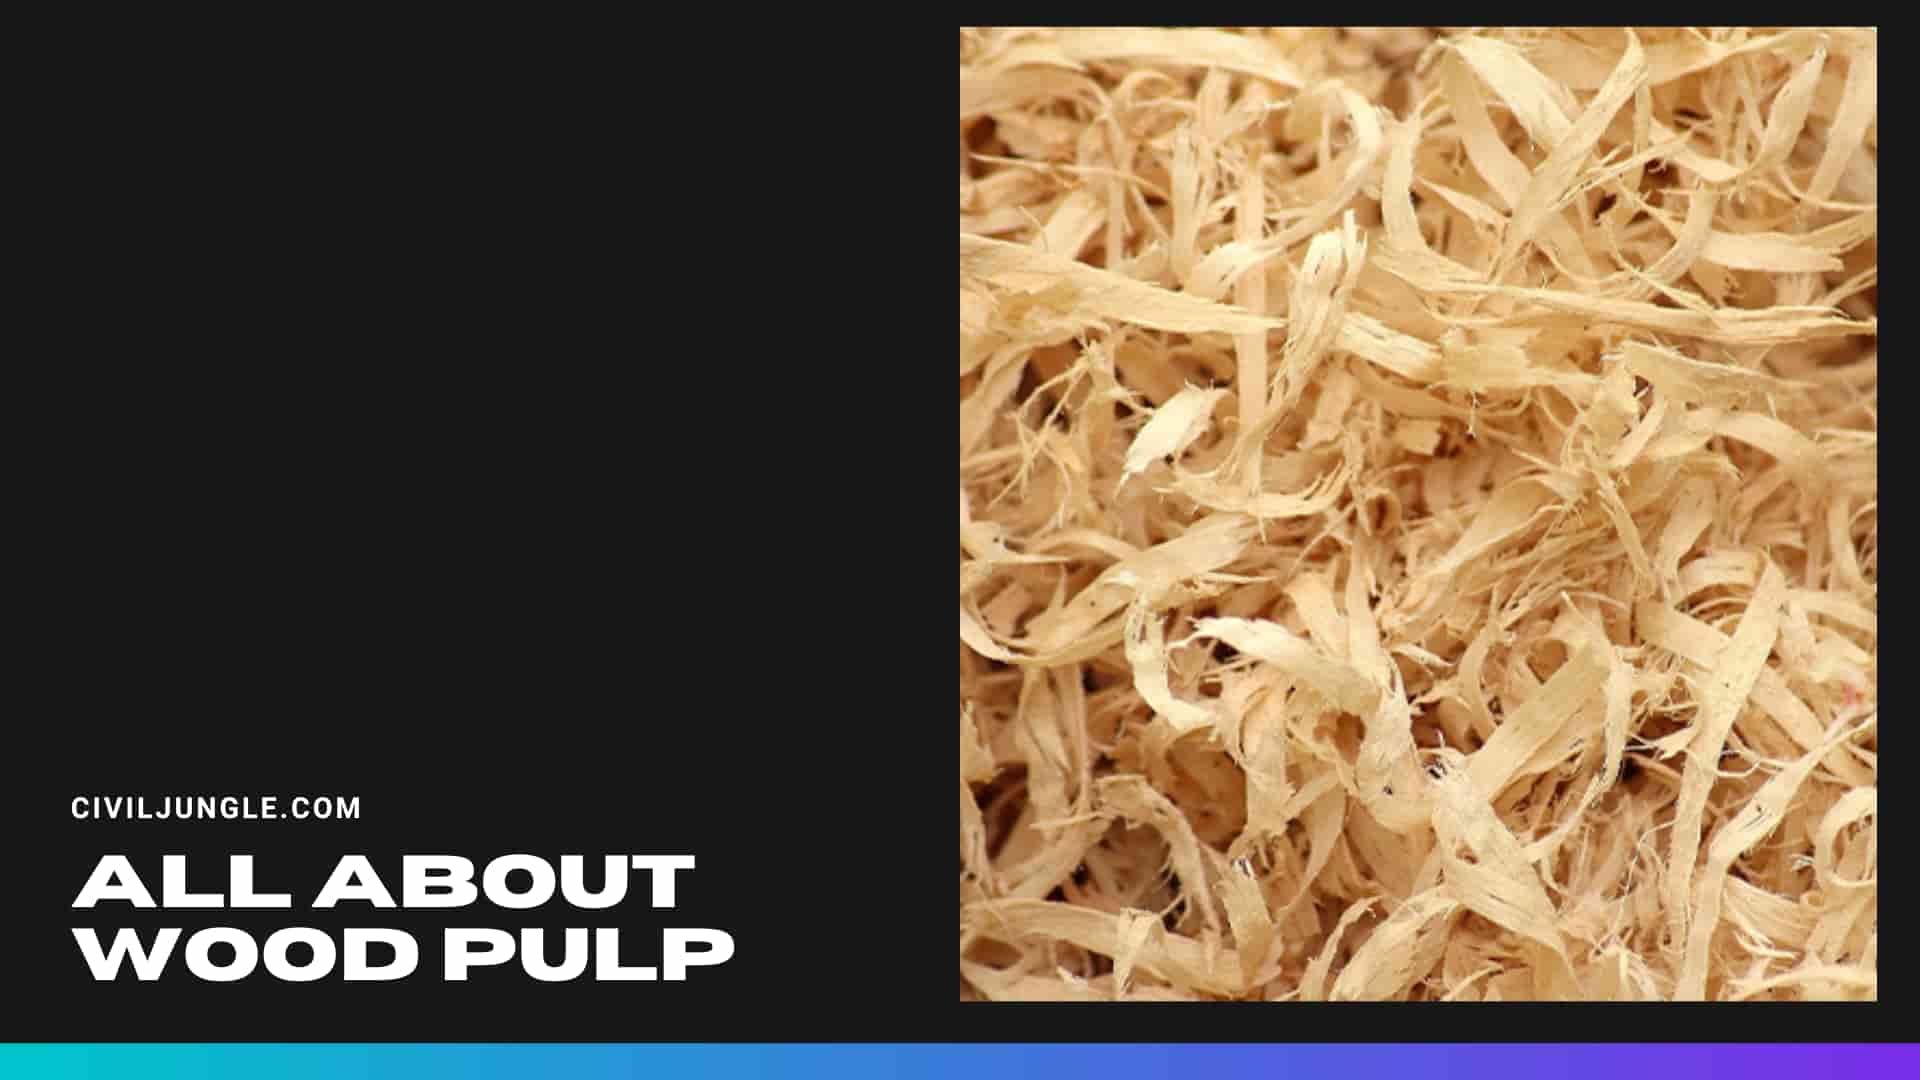 All About Wood Pulp